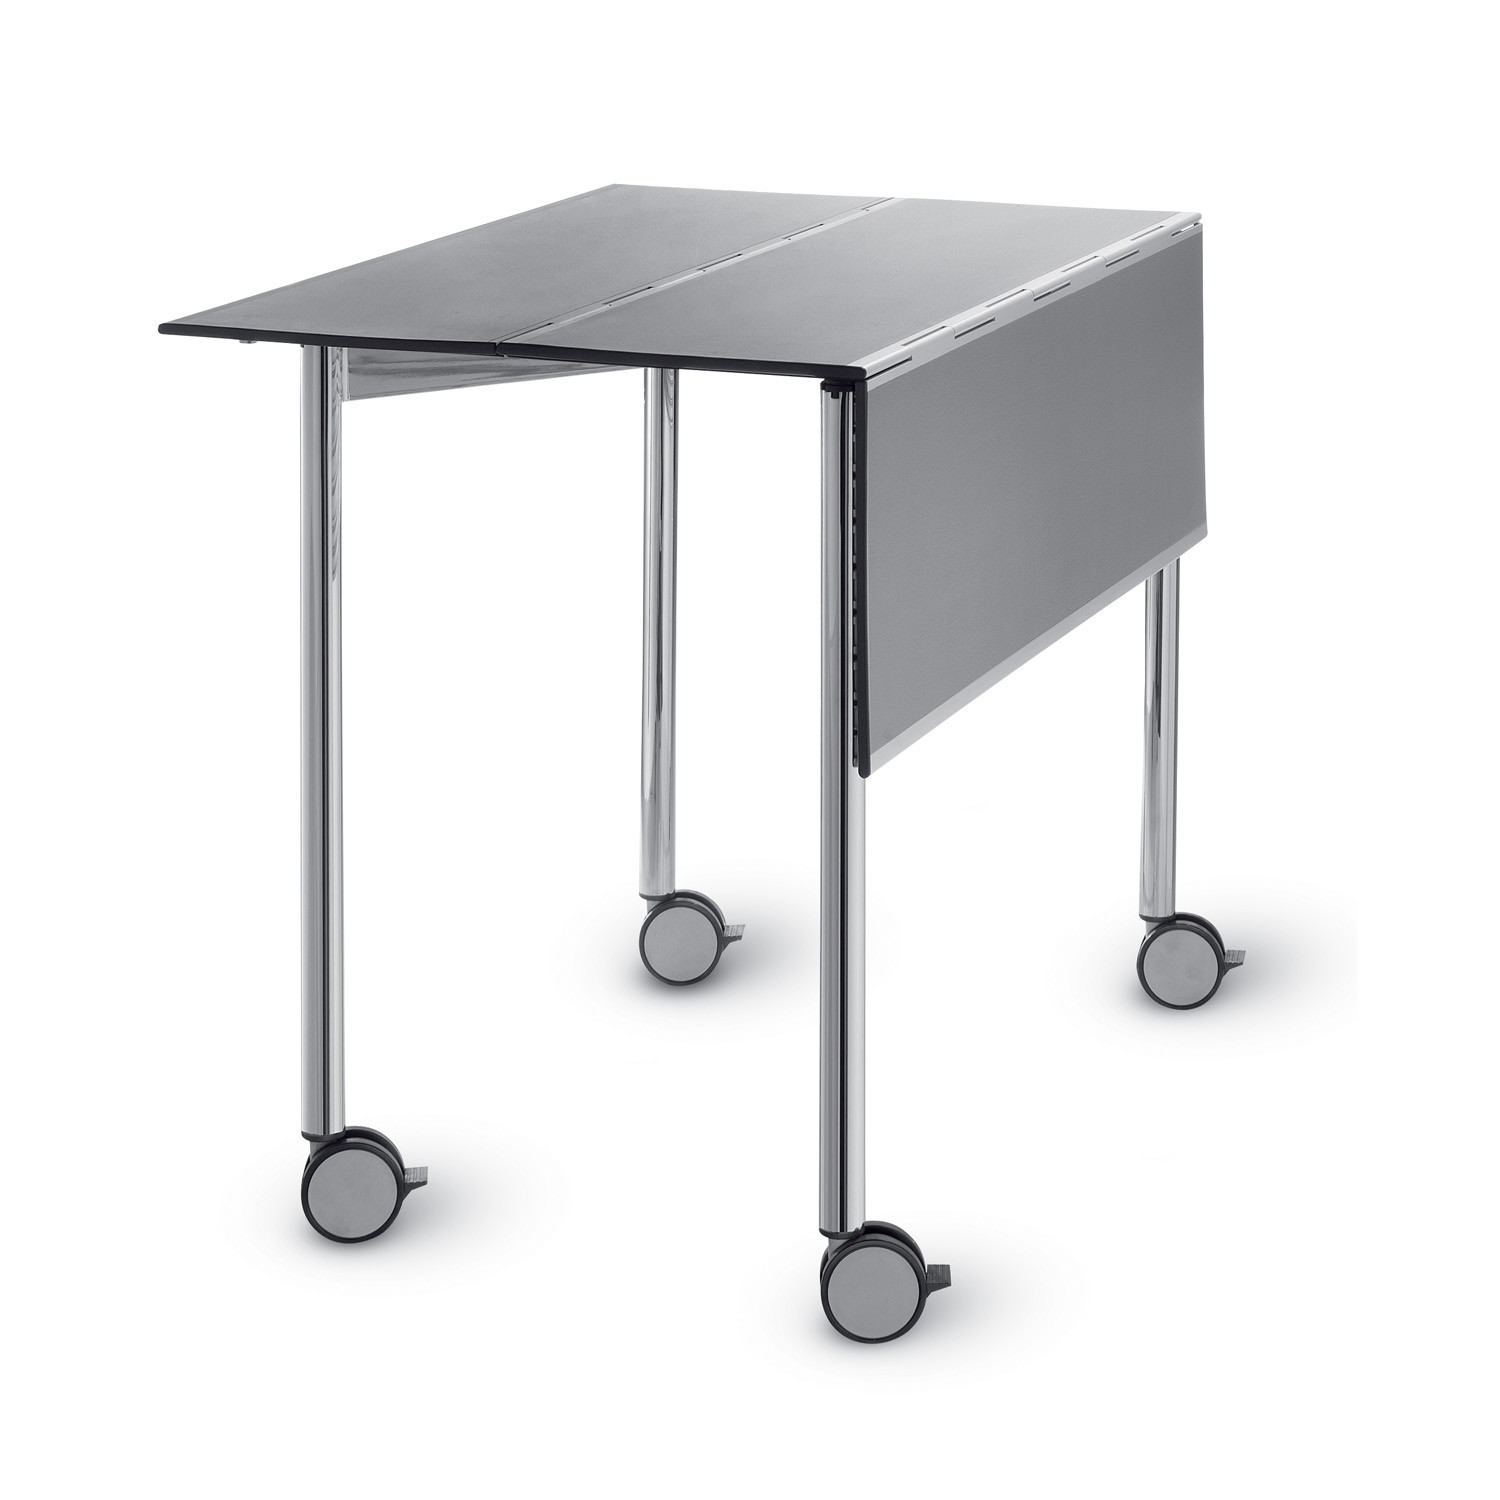 Join Me Folding Table